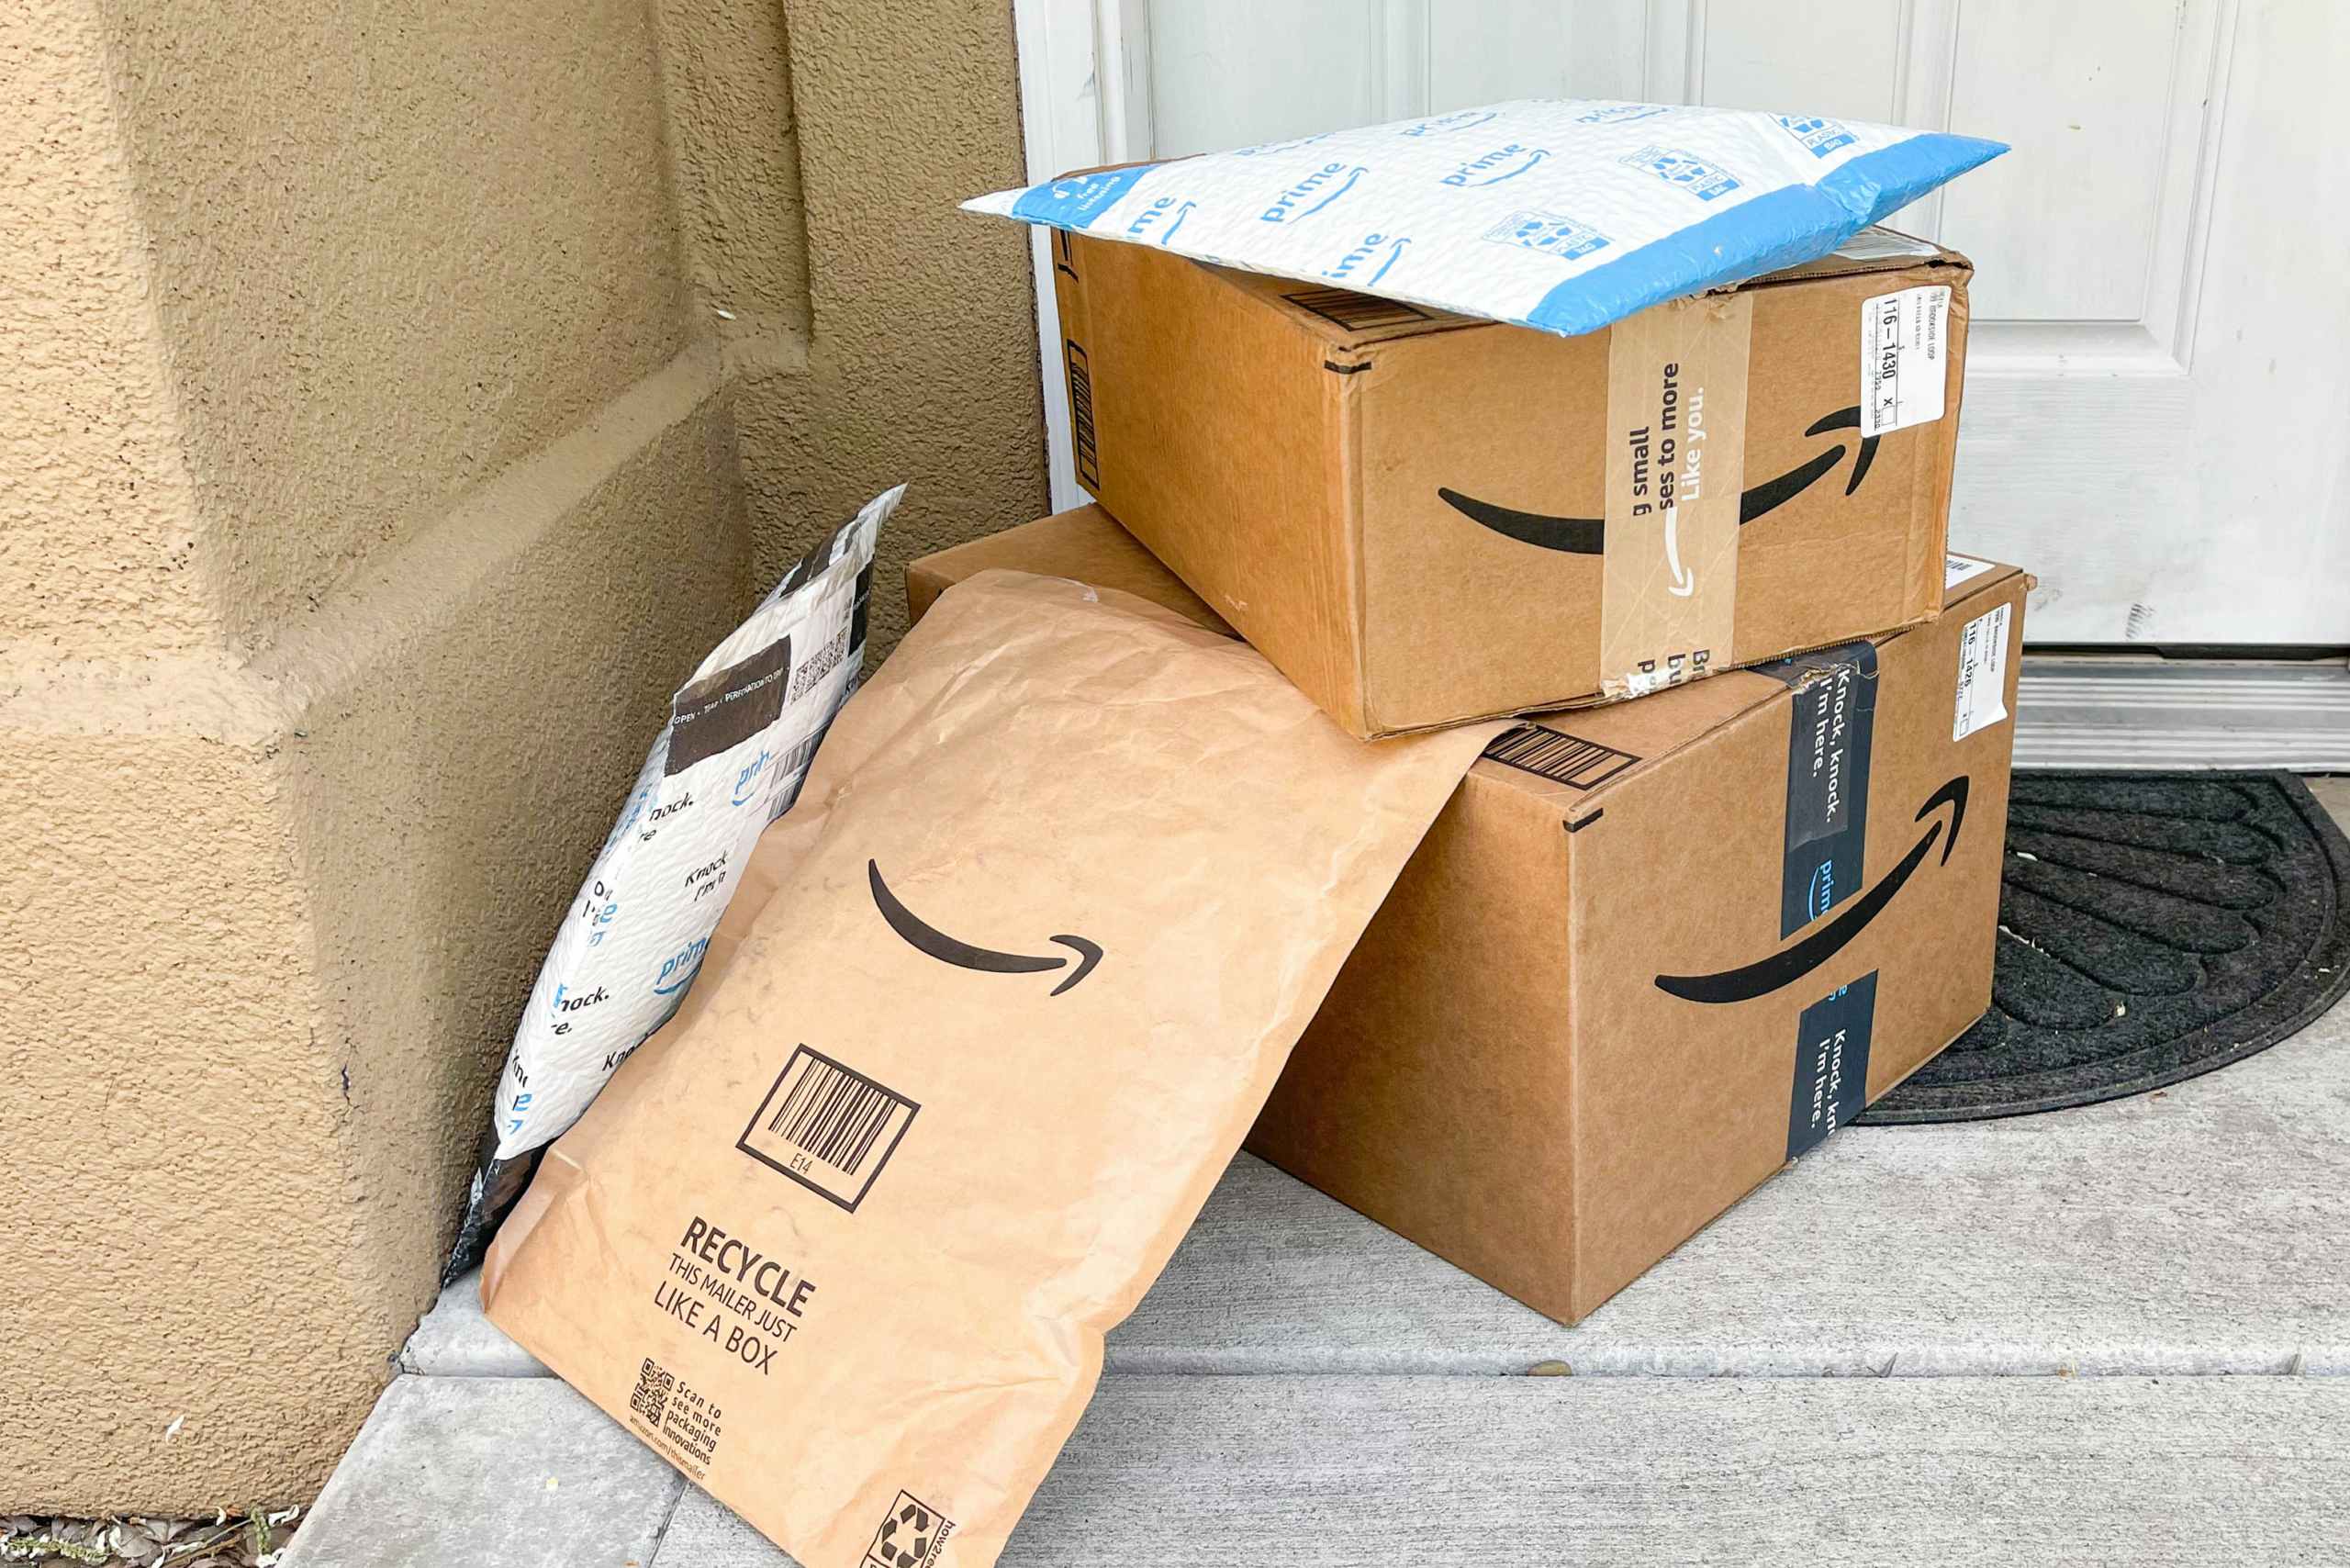 amazon packages and boxes on front porch